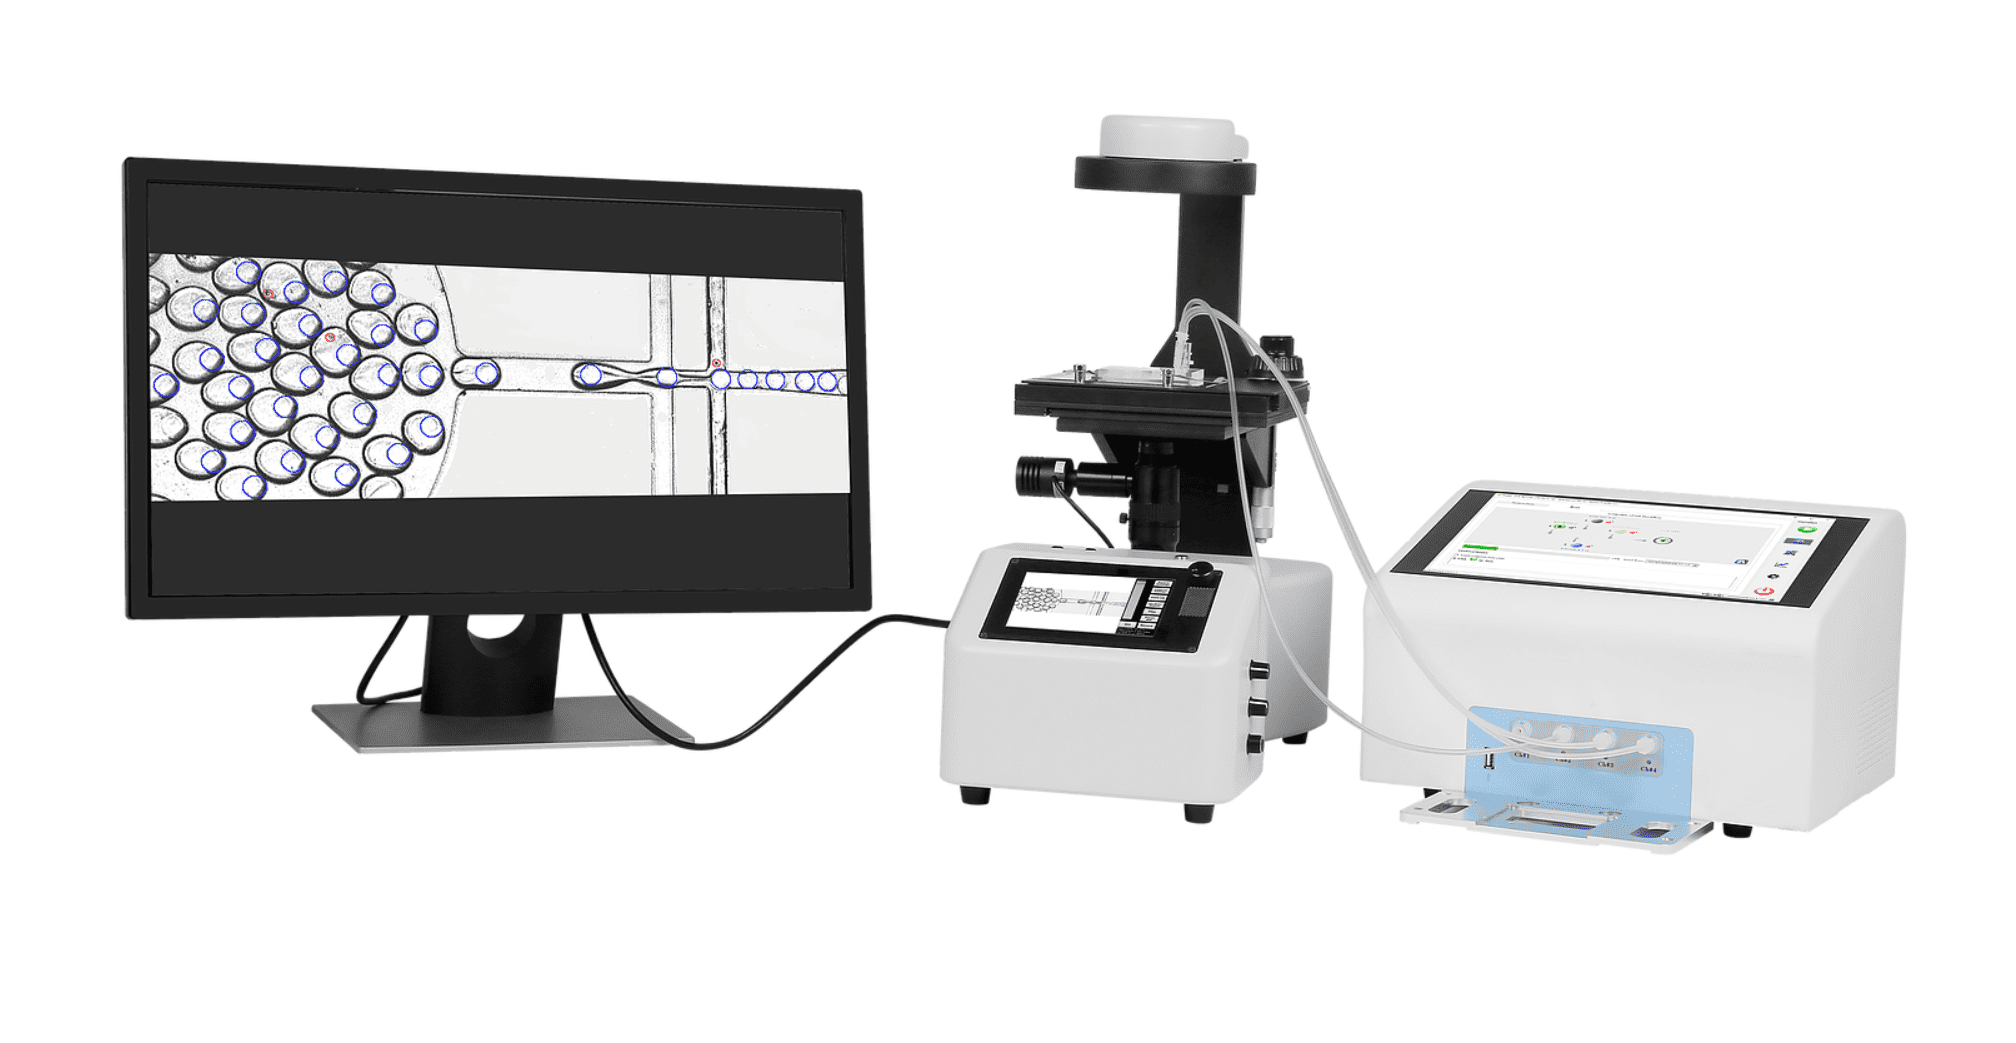 iFlow Droplet Generation and Single cell R&D Platform for single-cell encapsulation/isolation sample prep and study